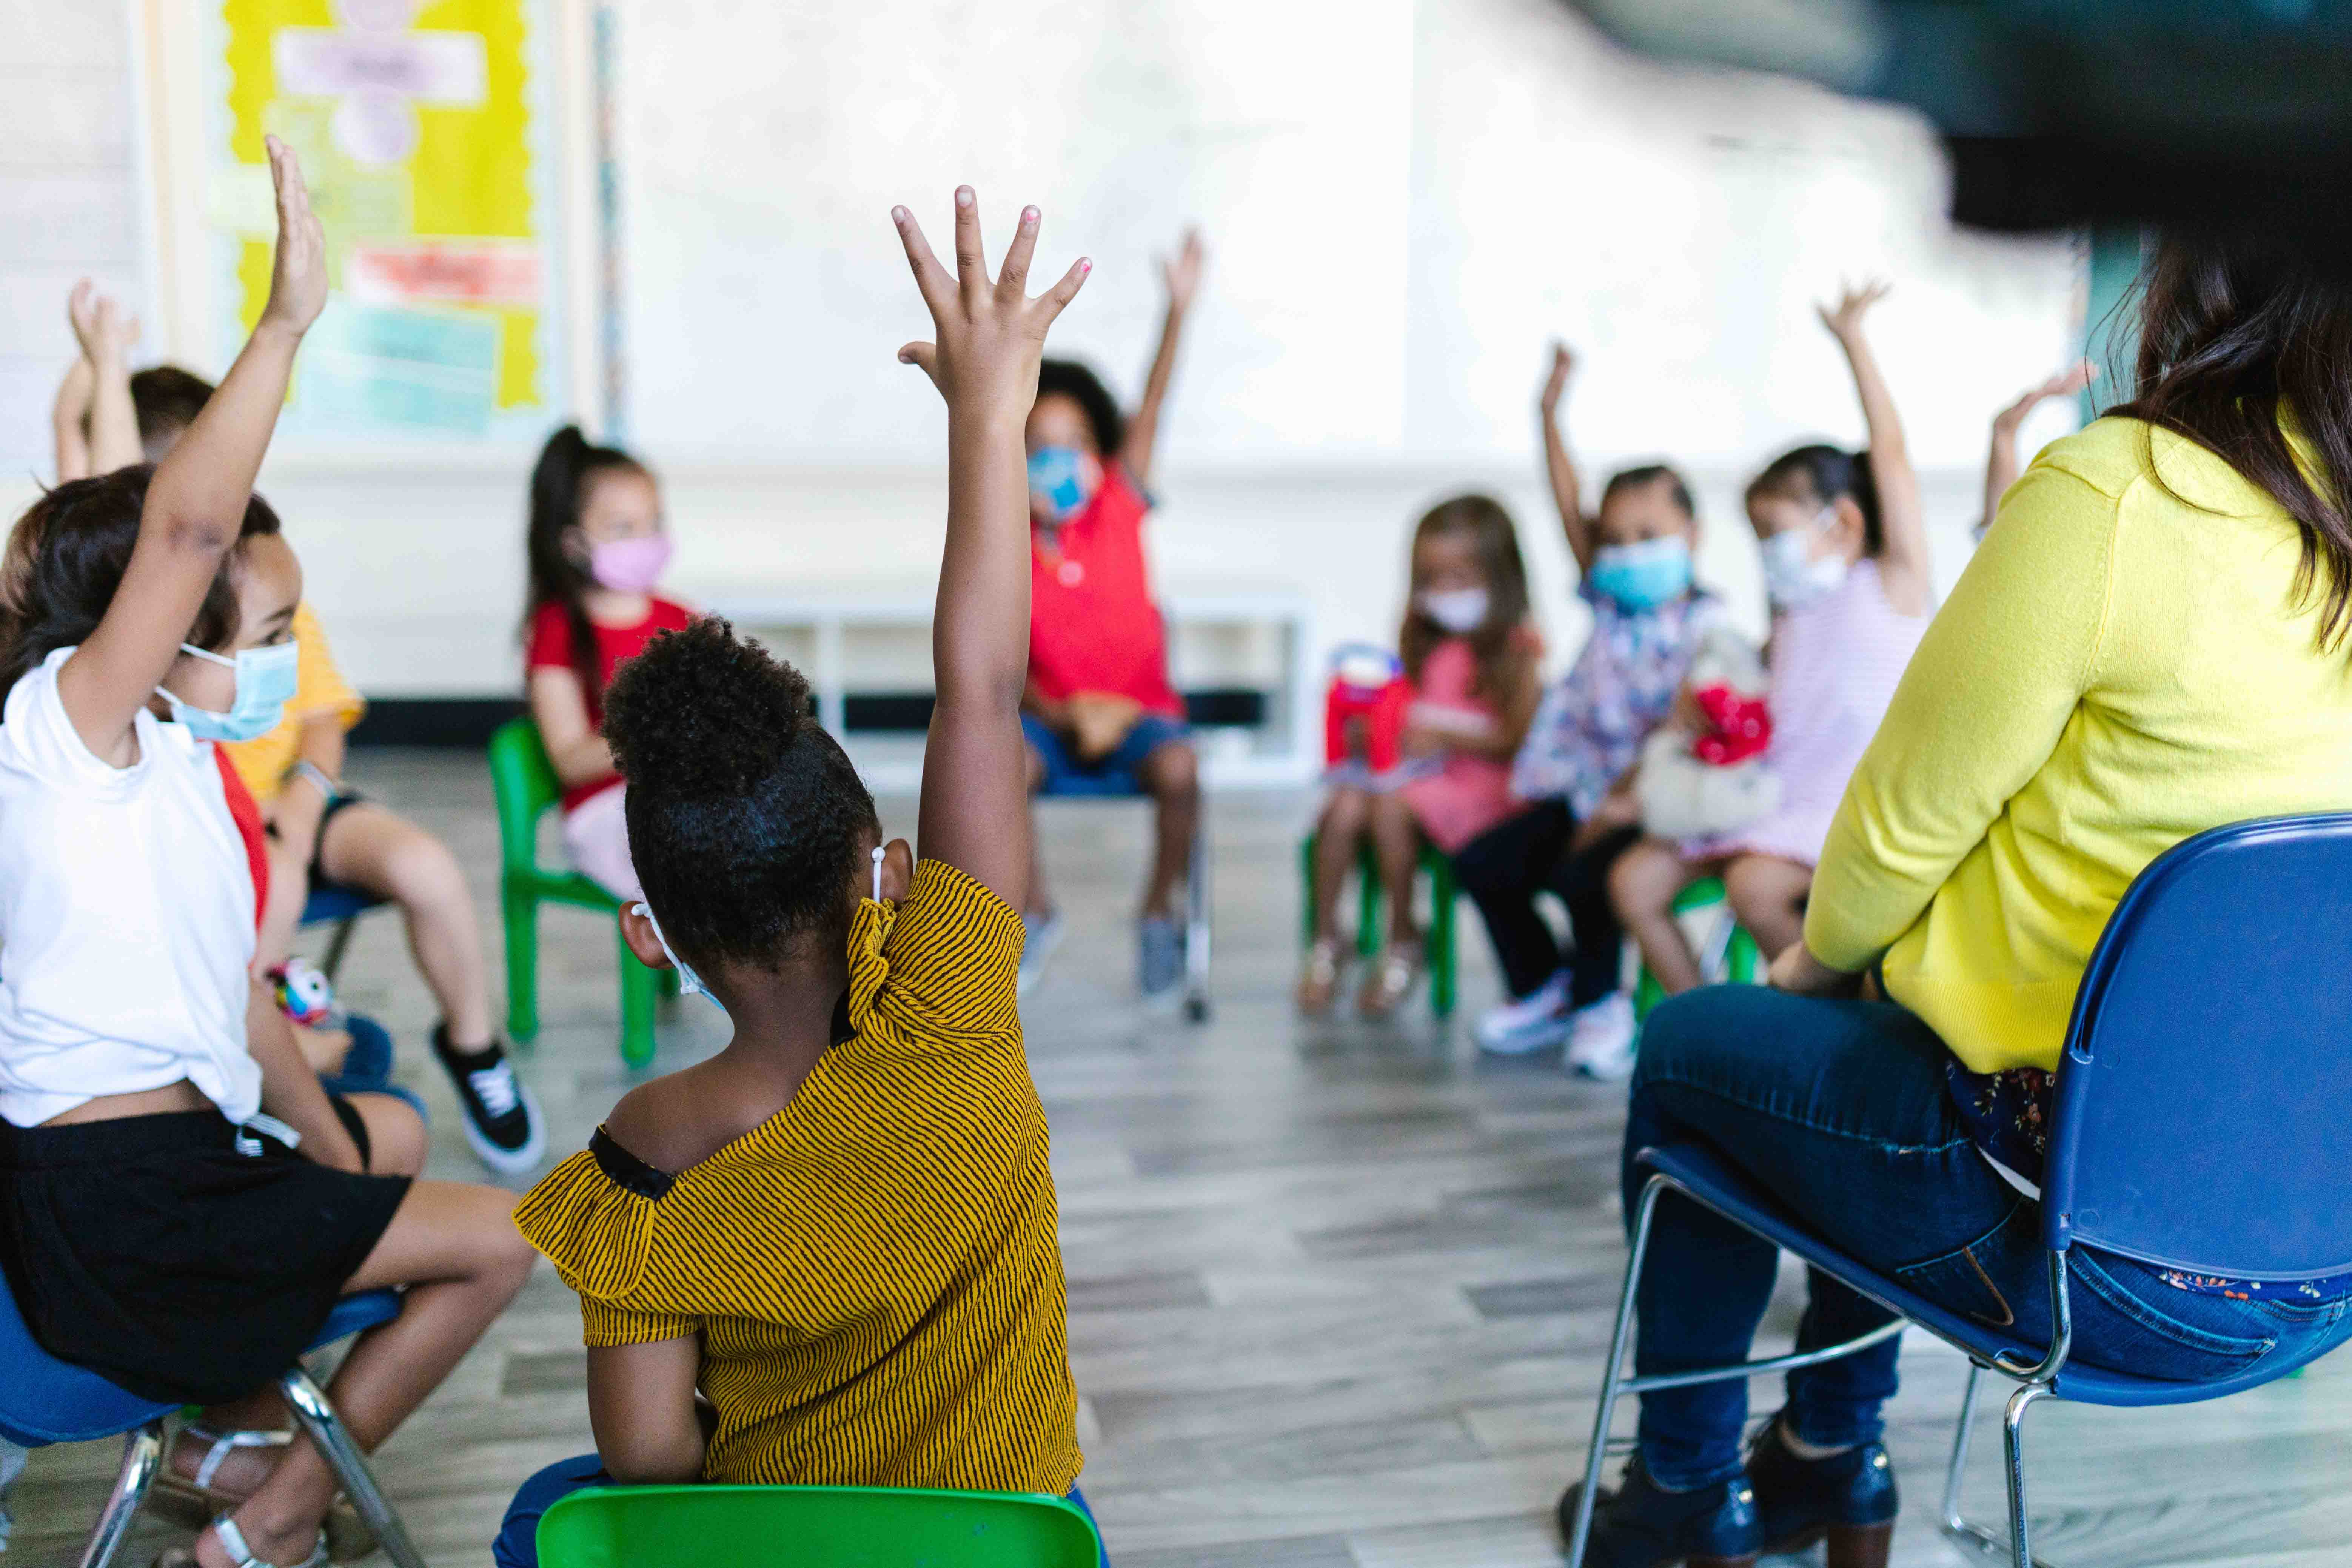 A group of preschool aged children sit in a circle and raise their hands